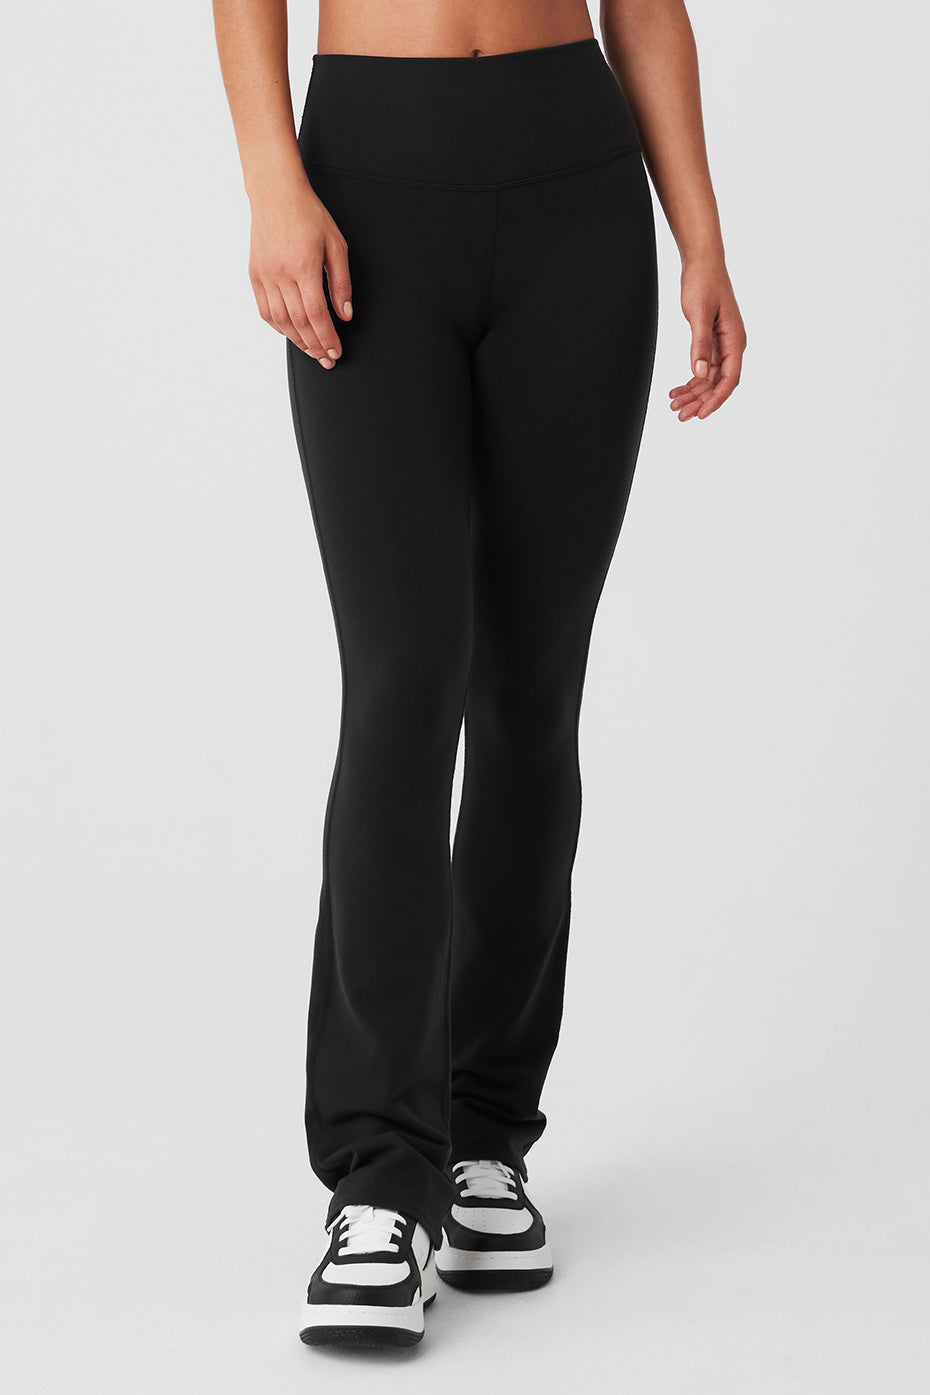 Bootcut Yoga Workout Pants Flare Leggings With Pockets For Women With  Pockets Womens High Waisted Work Dress Pants Fashion Summer Dance Clothes  Clothing From Appletree_, $19.76 | DHgate.Com